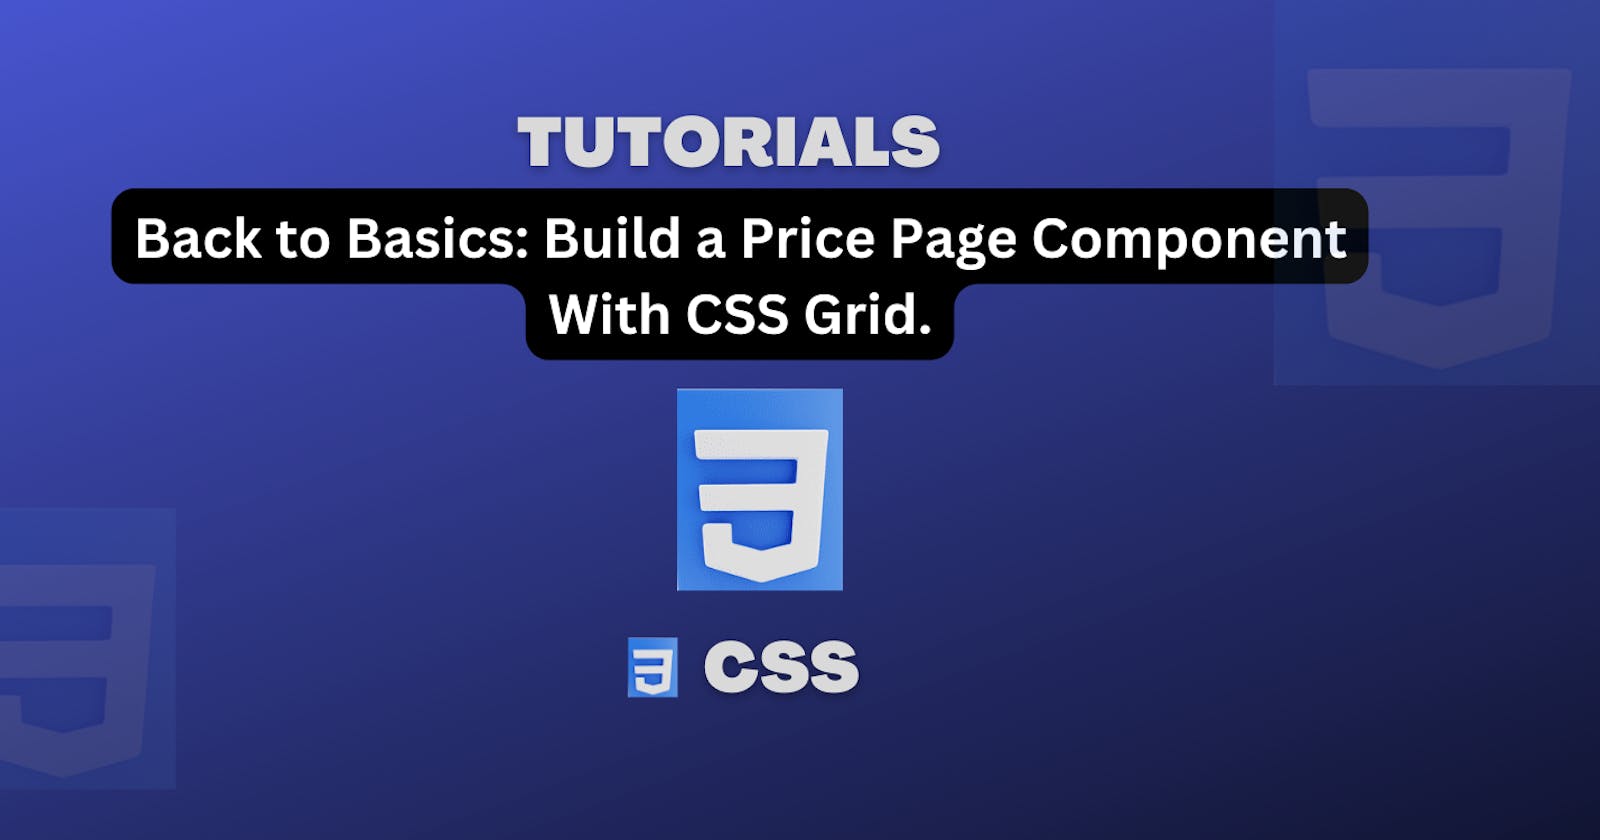 Back to Basics: Build a Price Page Component With CSS Grid.